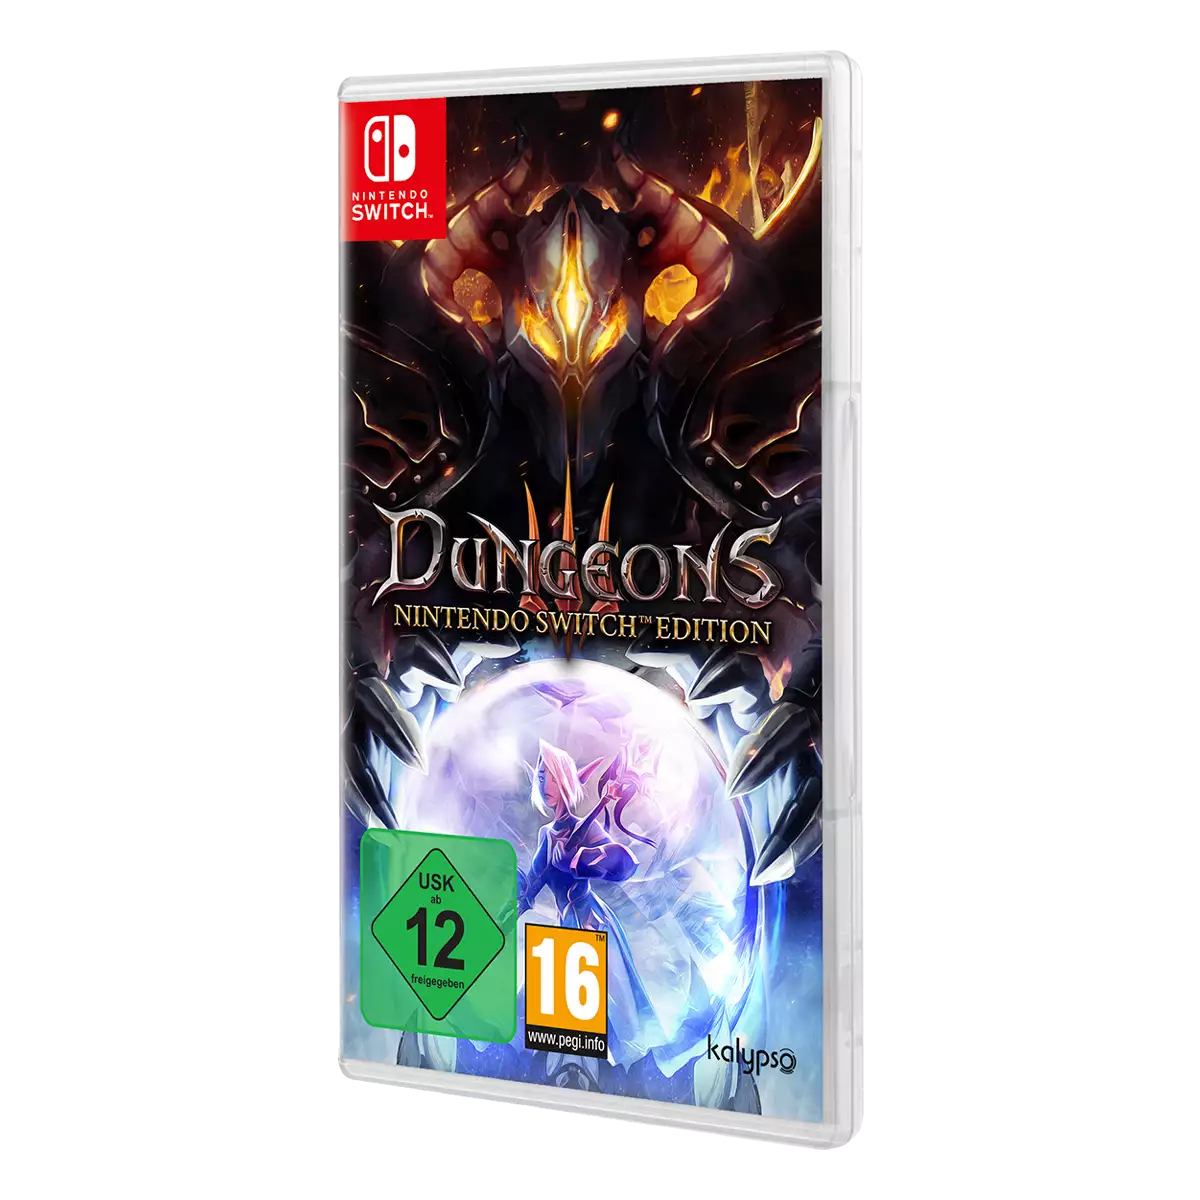 Dungeons 3 - Nintendo Switch Edition (Switch) Image 2